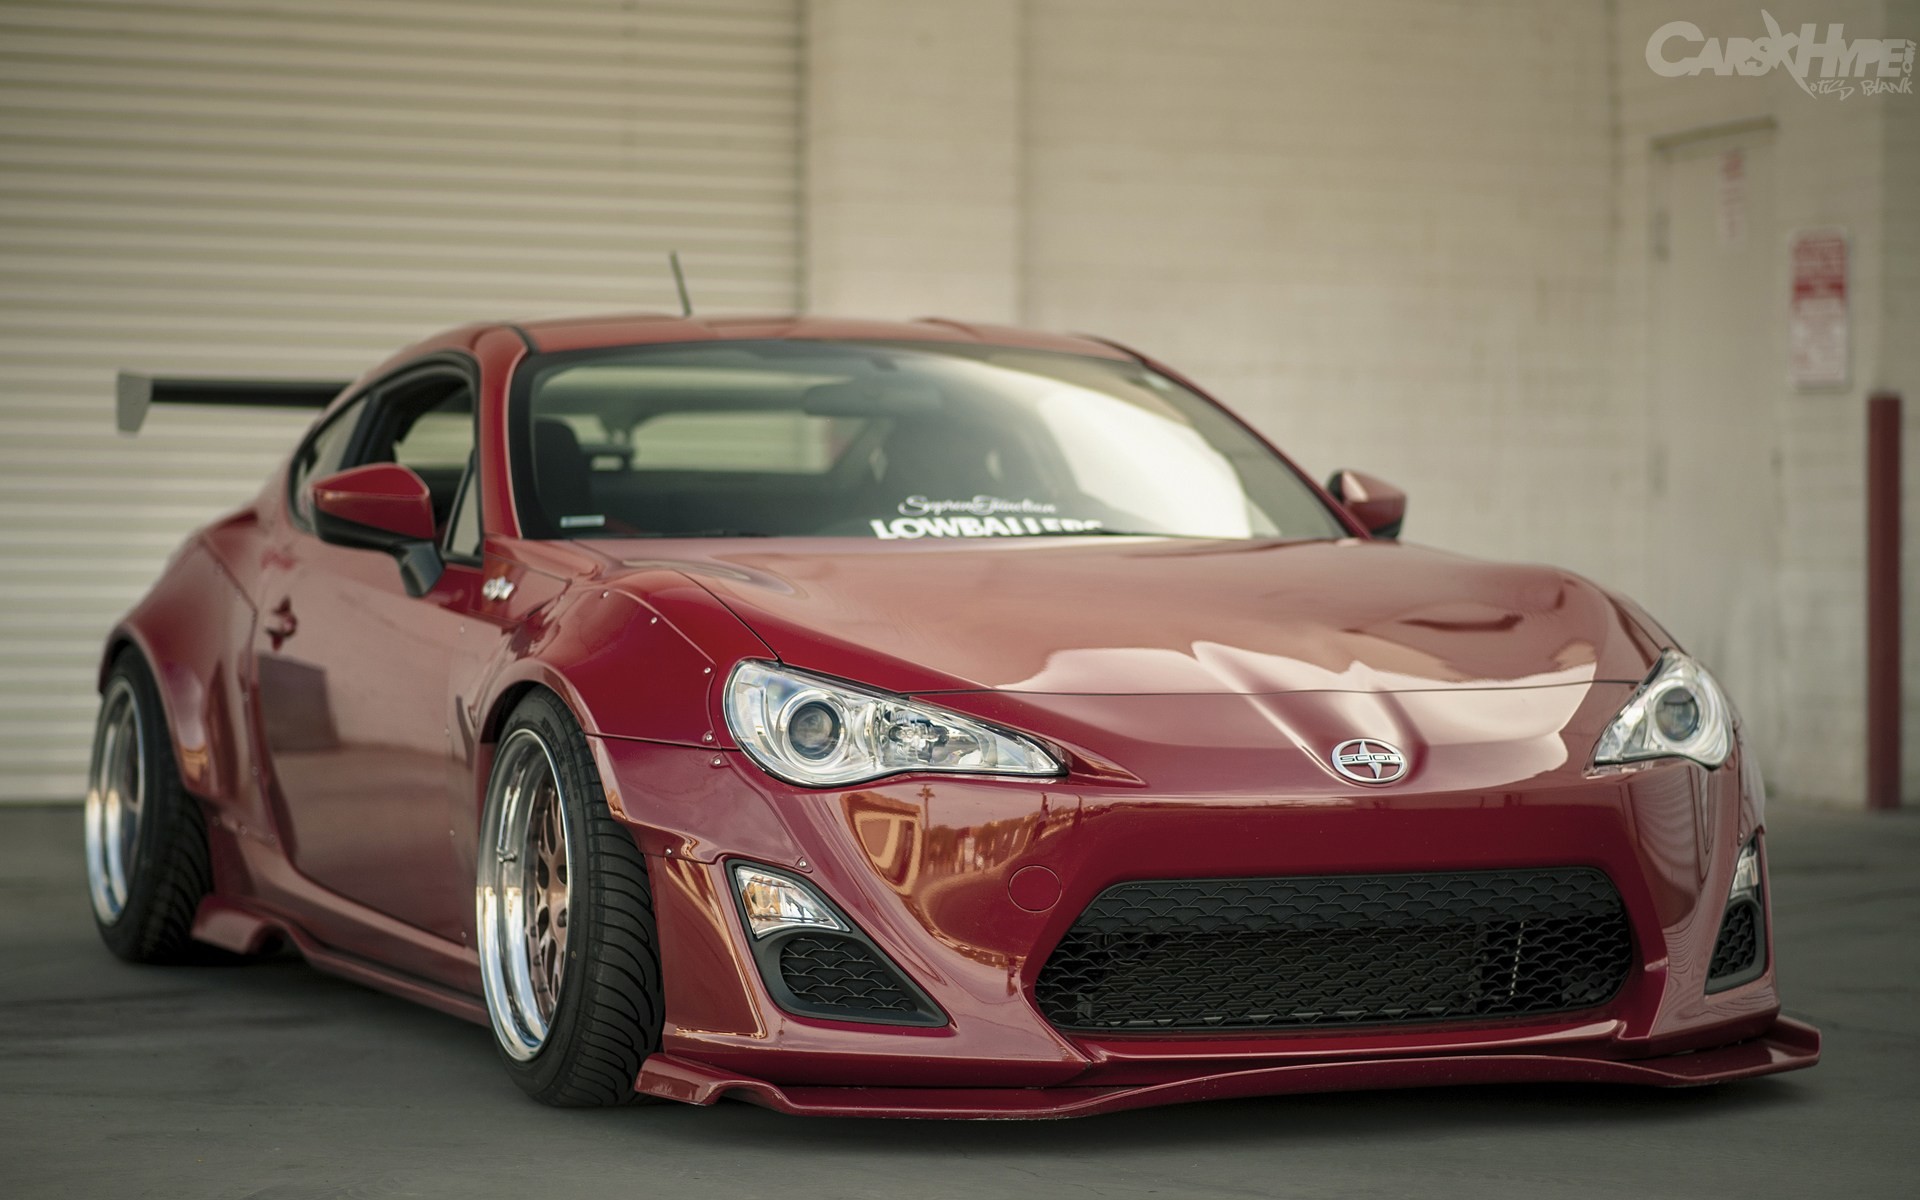 Throwing on a Rocket Bunny kit on an FRS/86 seems to be the thing to do,  not that I mind lol.